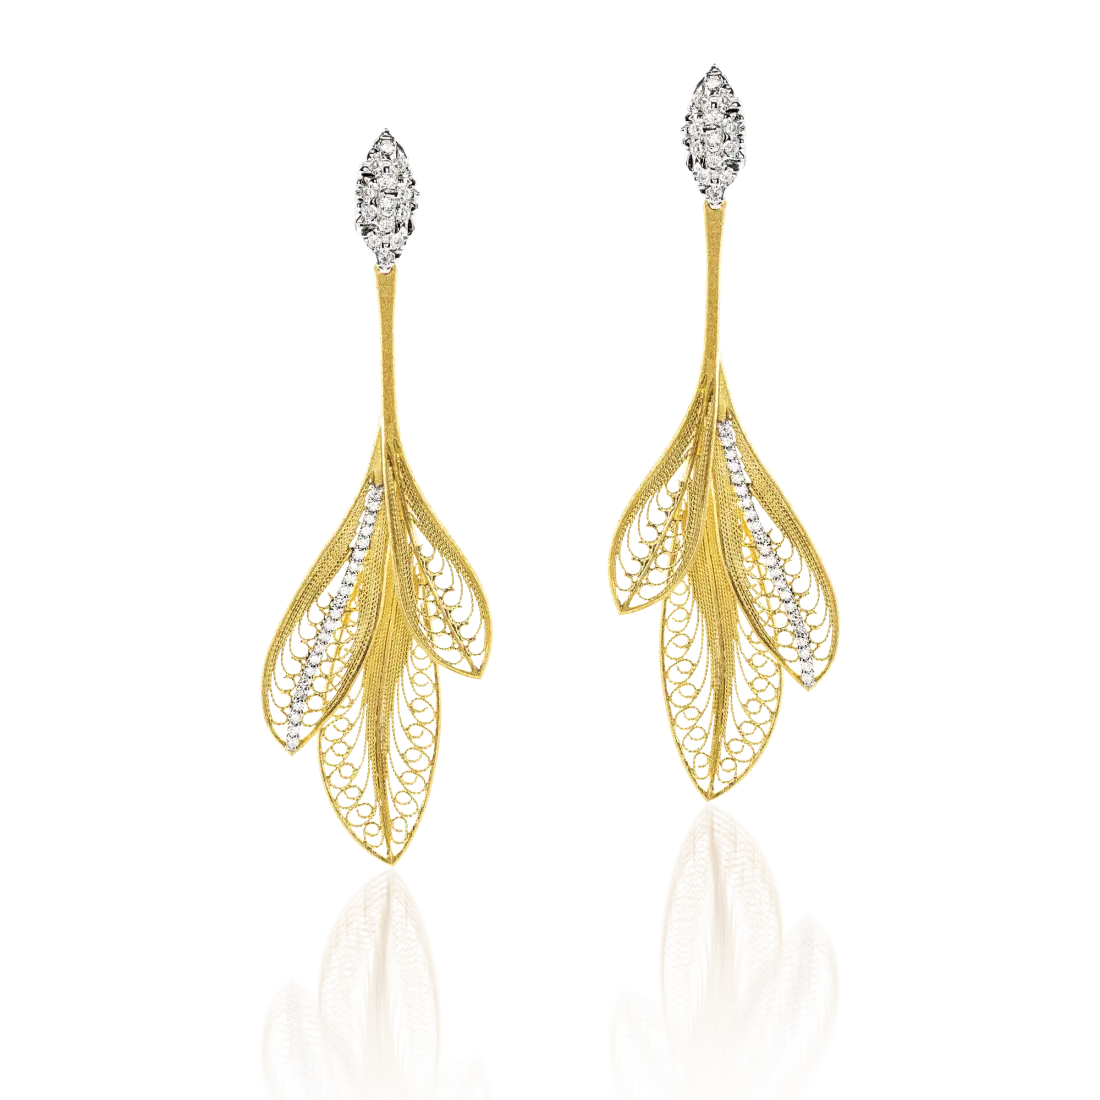 Drop earrings in 18k yellow and white gold with .38 cttw diamonds.  Details:  Approximate dimensions: 60 mm x 19 mm. Approx. gold weight: 9.10 g 70 round brilliant-cut VS G diamonds totalling 0.38 ct Designed by Luisa Rosas and made in Portugal